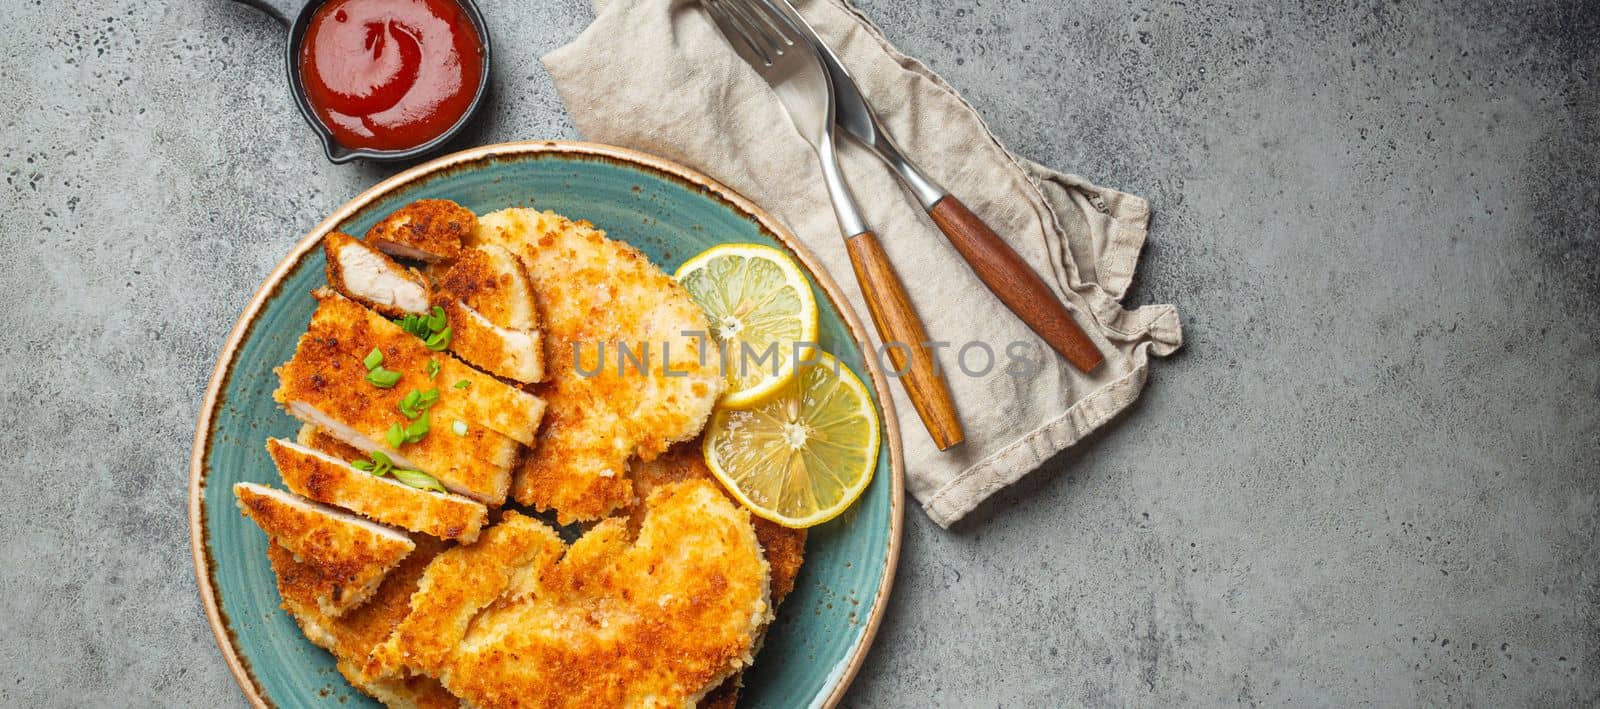 Crispy panko breaded fried chicken fillet with green salad and lemon cut on plate on gray background table with ketchup from above. Japanese style deep fried coated chicken breasts, space for text. by its_al_dente